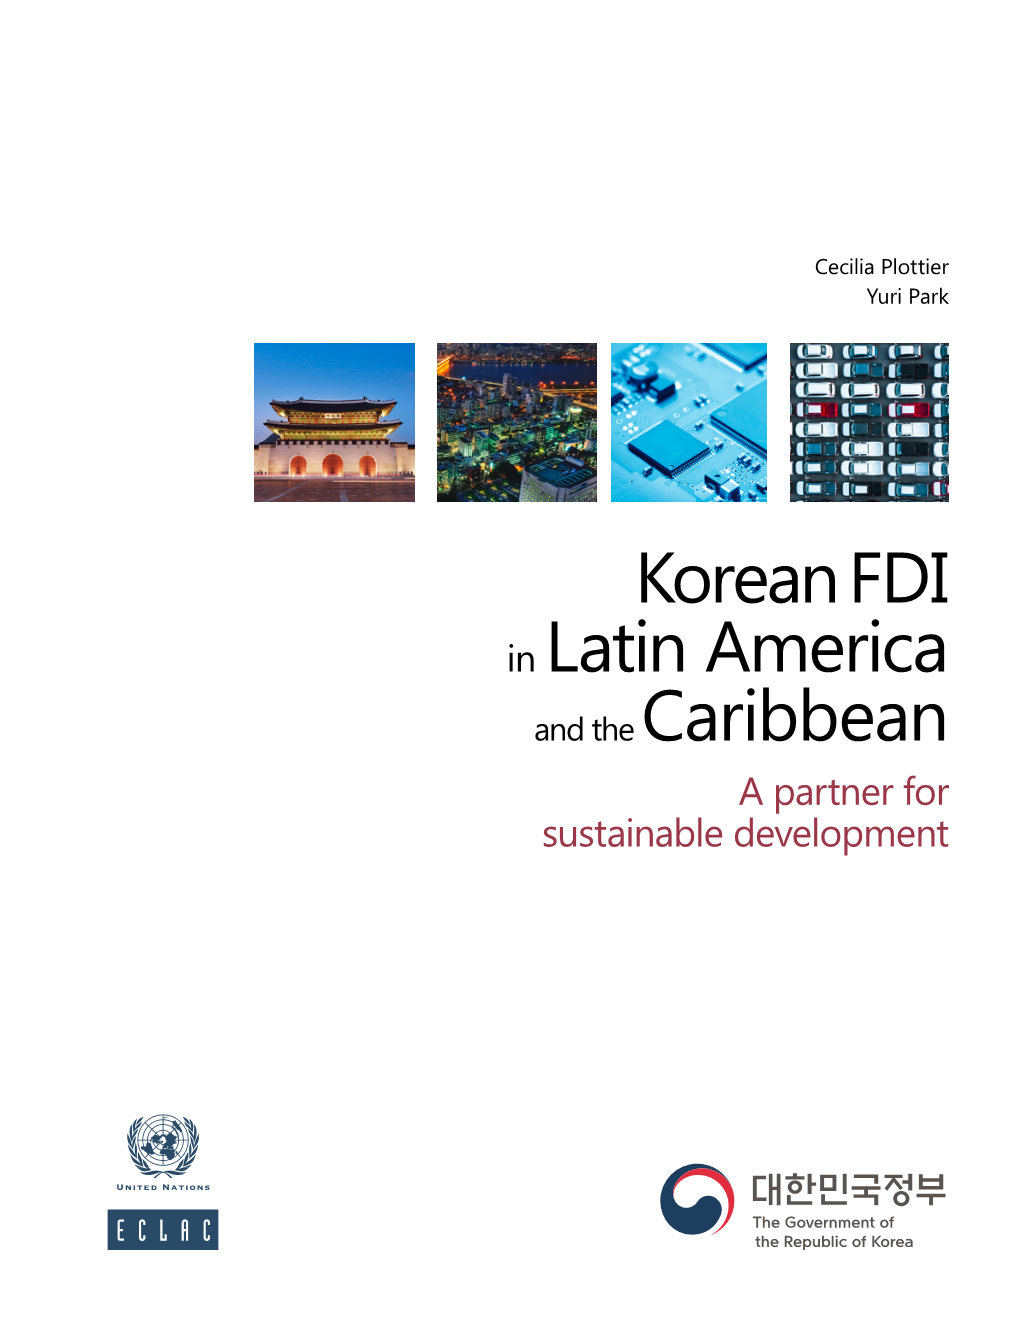 Korean FDI in Latin America and the Caribbean: a Partner for Sustainable Development